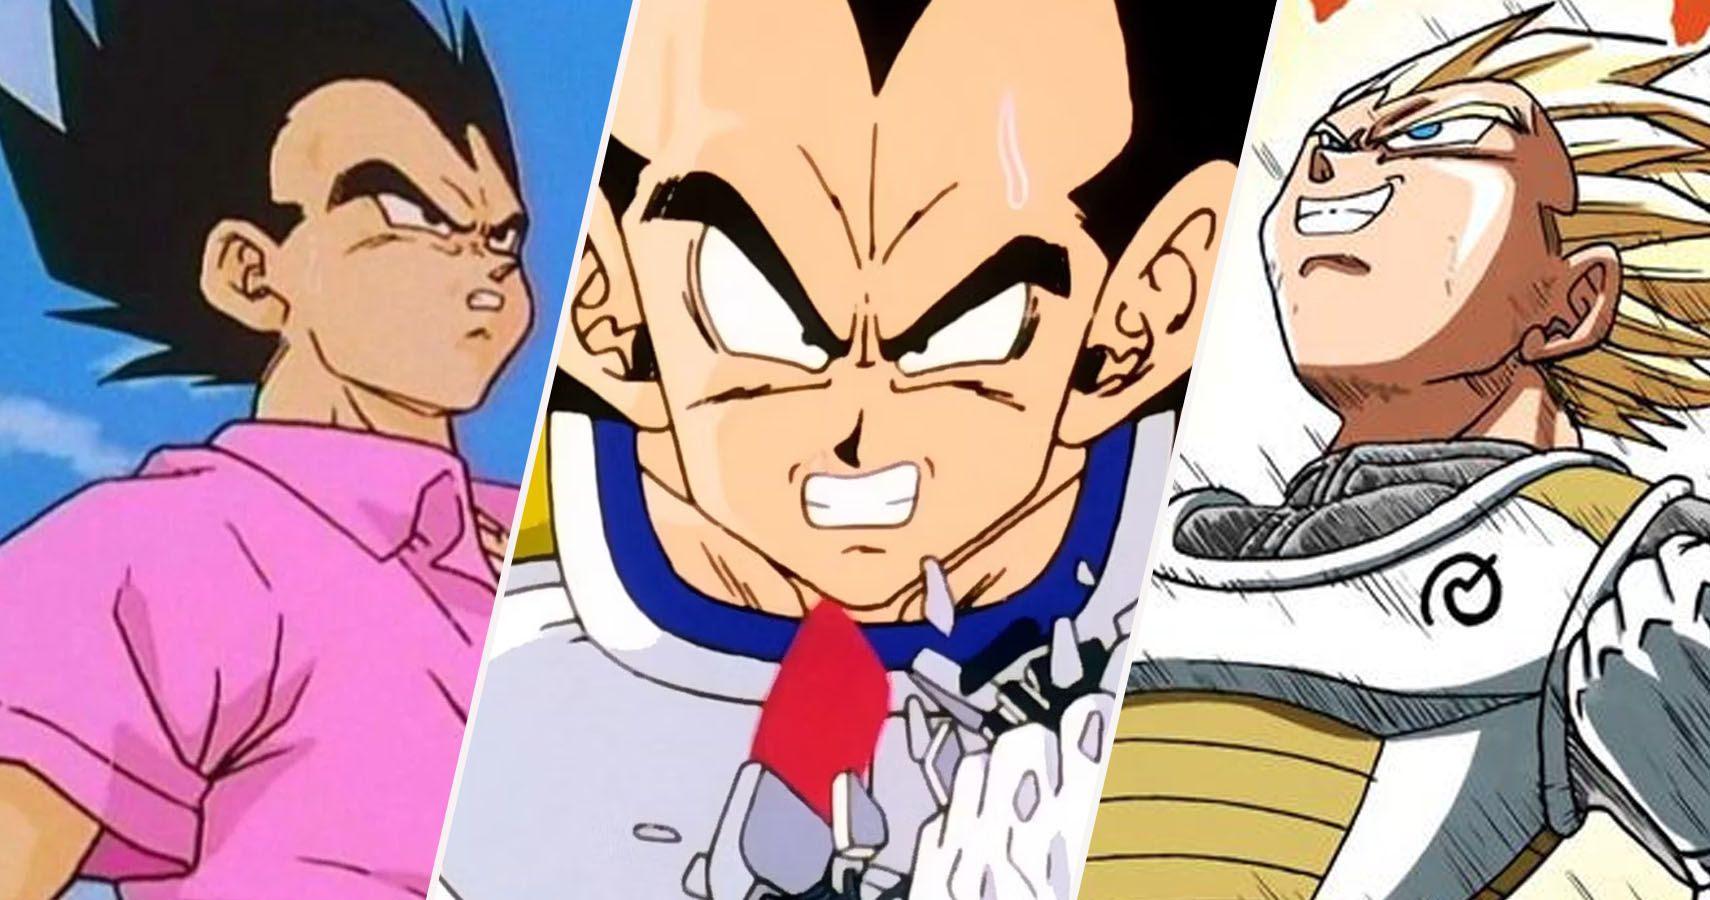 Vegeta in his Badman Shirt, Saiyan Armor, and Whis Armor from Dragon Ball Z and Super